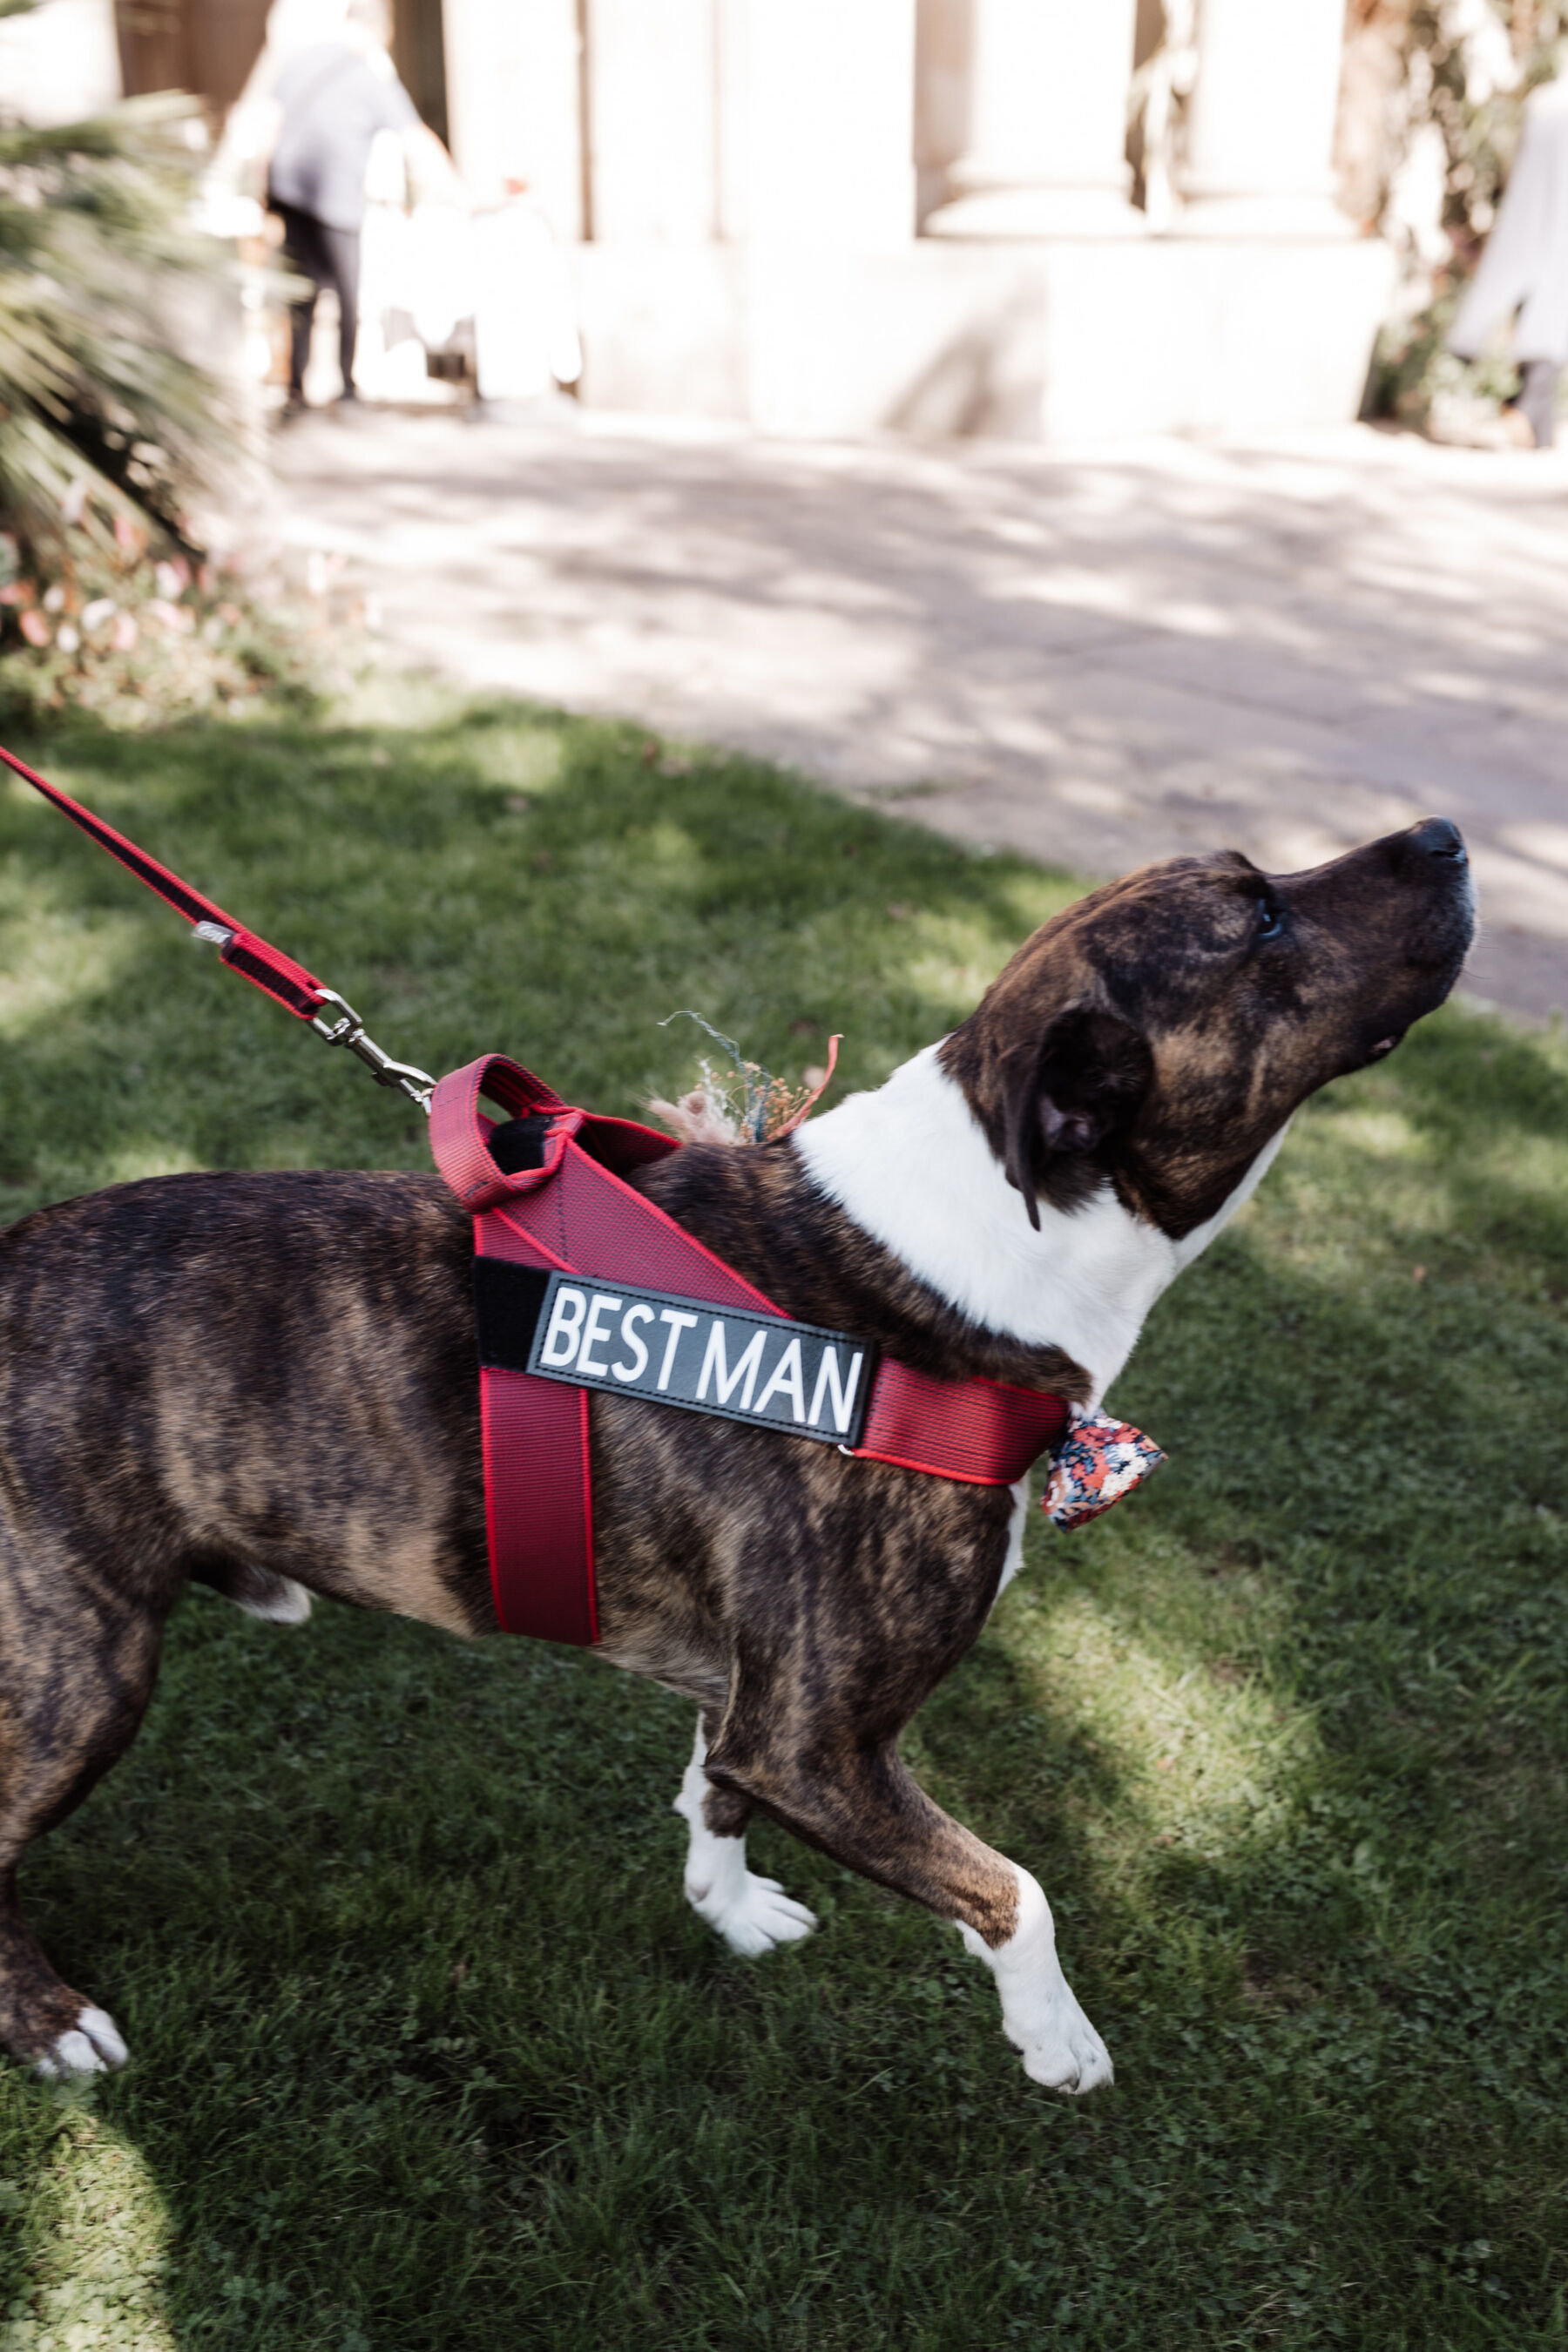 Best dog at wedding. Dog with Best man harness.